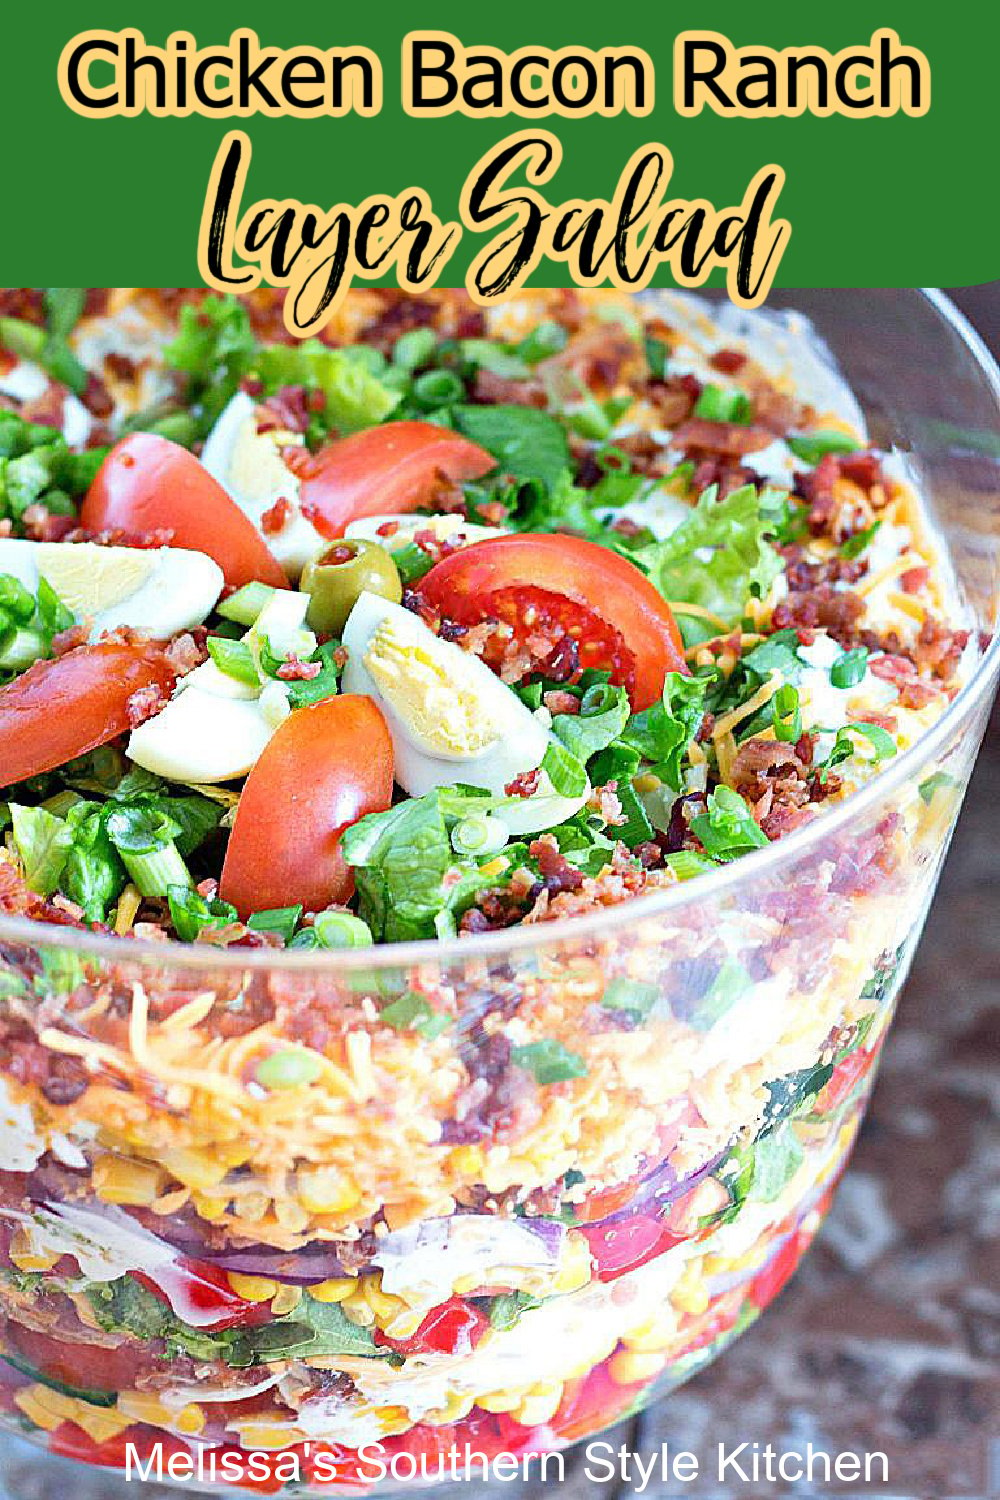 Enjoy this stunning Chicken Bacon Ranch Layer Salad as a side dish or an entree #chickenbaconranch #layersalad #chickenbaconranchsalad #chicken #bacon #salads #saladrecipes #sideidishrecipes #dinnerideas #dinner #southernfood #ranchdressing #southernrecipes via @melissasssk